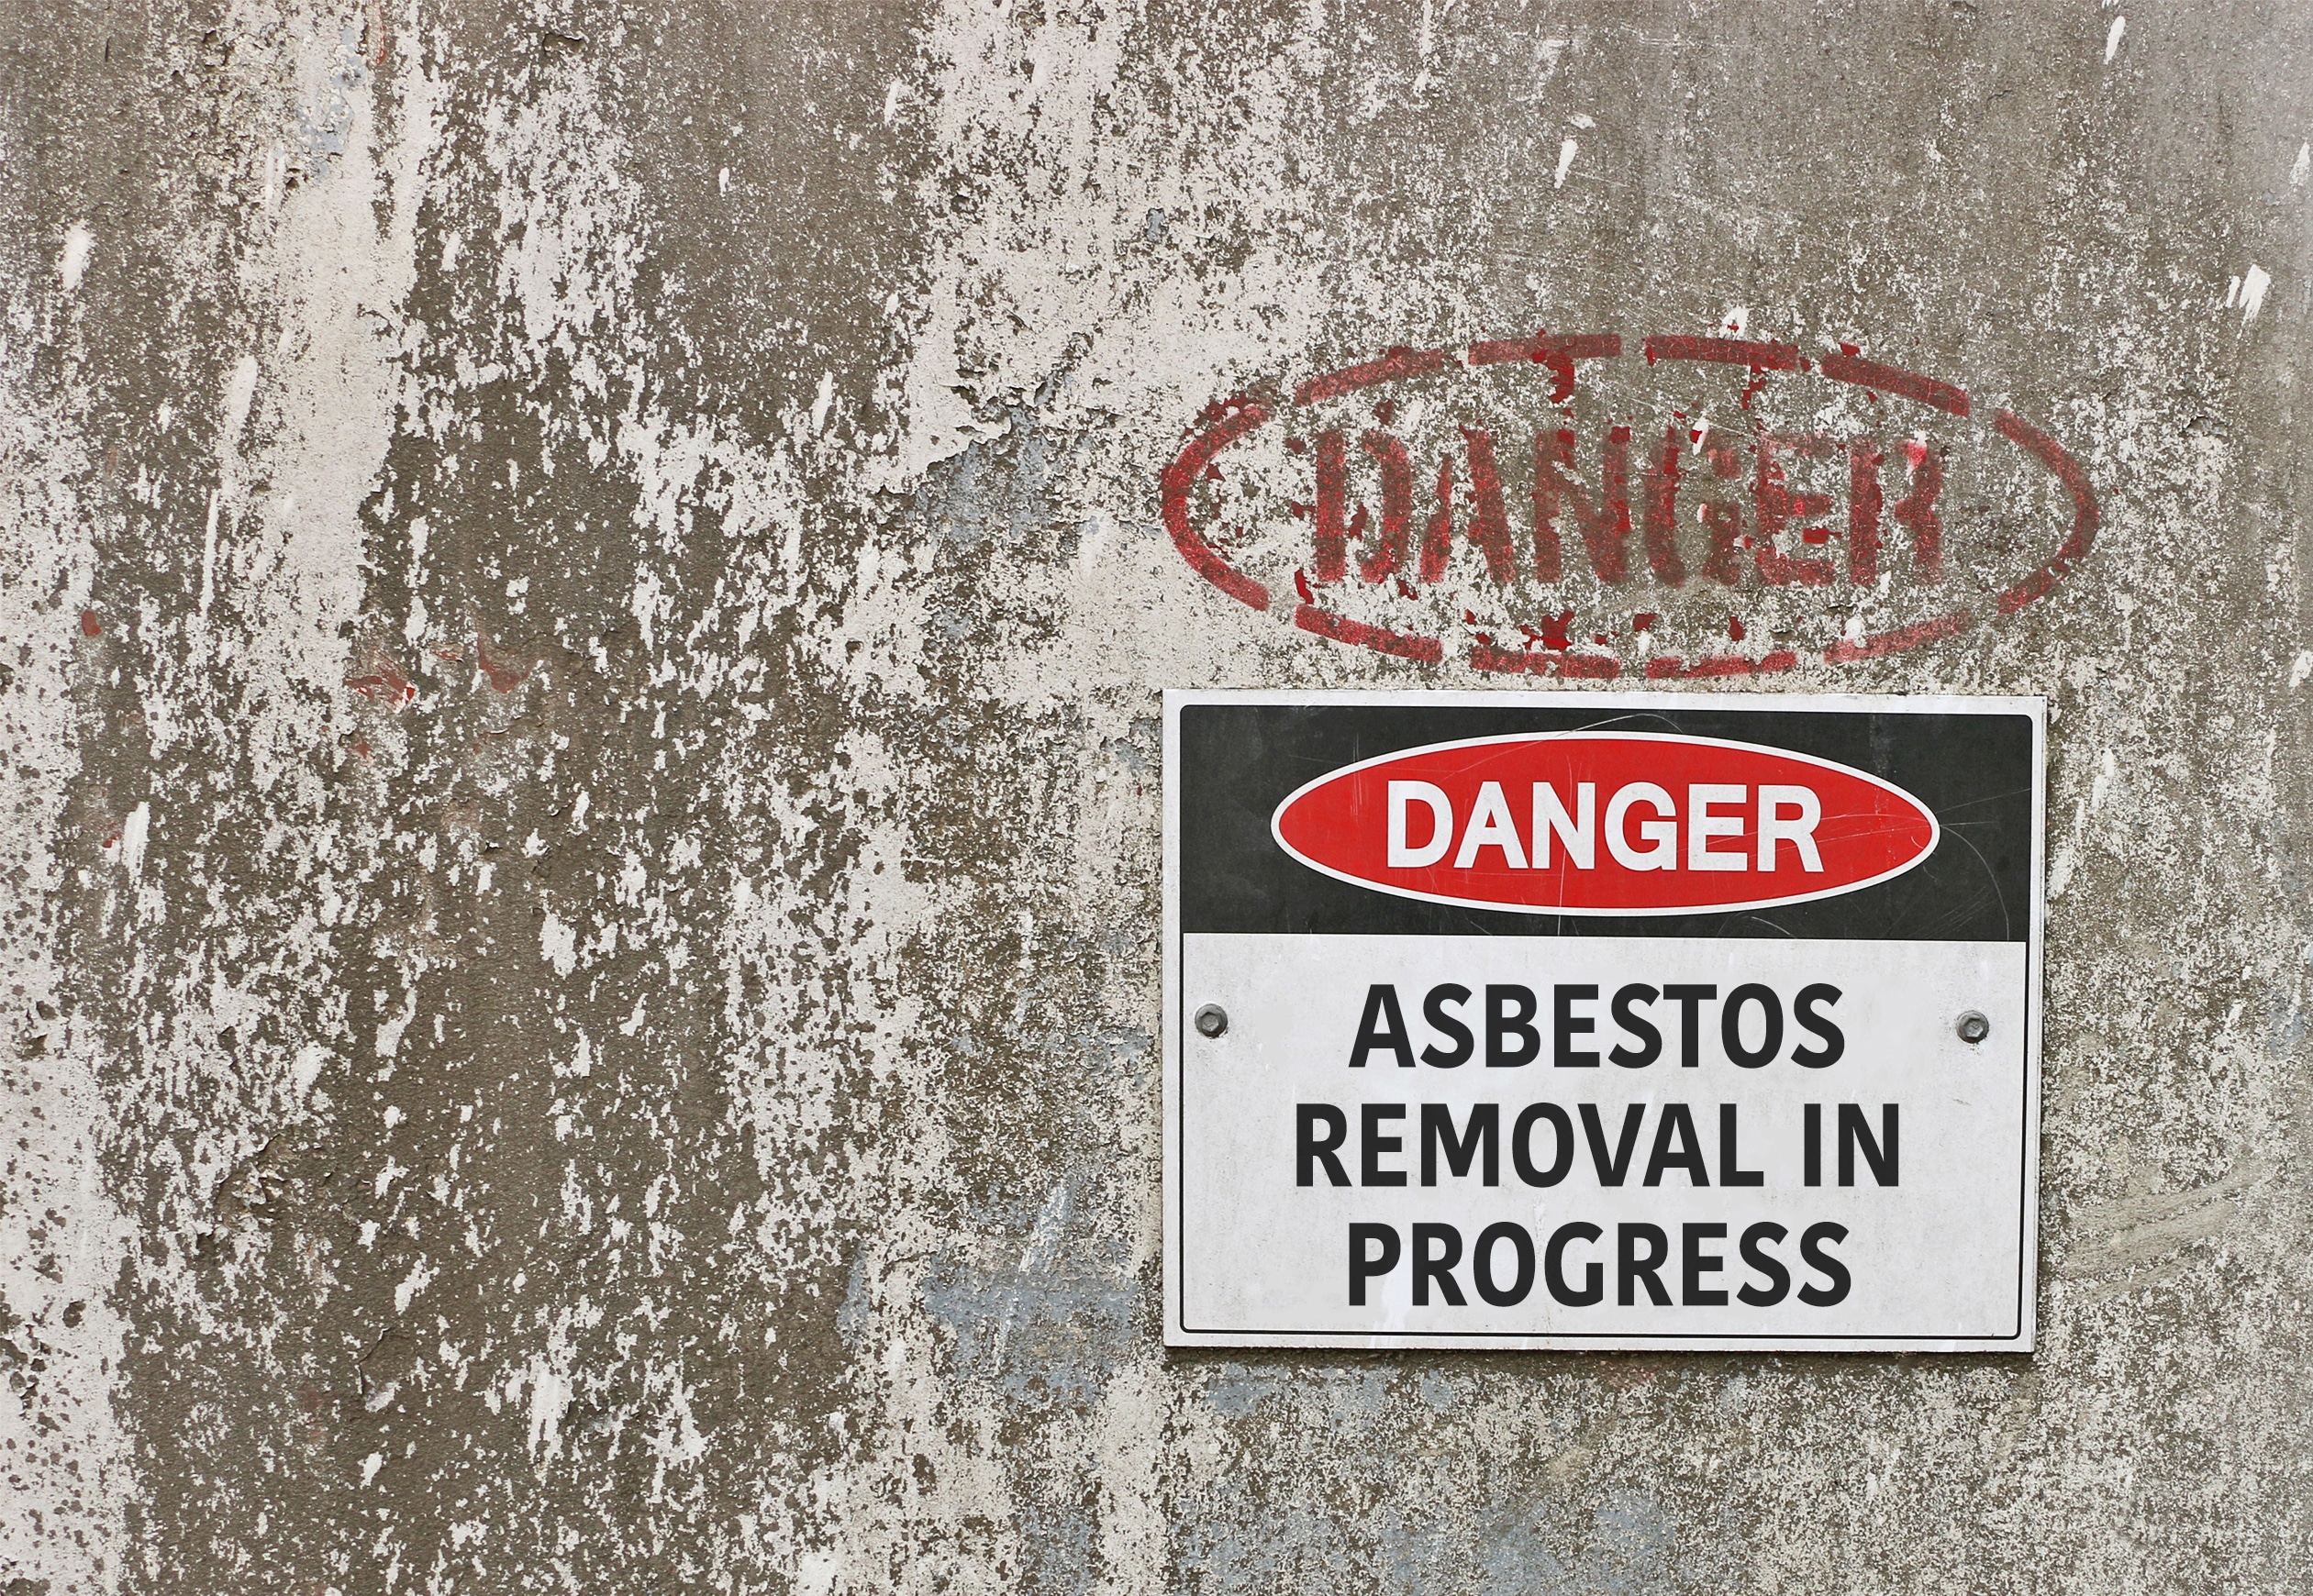 A judge in a California asbestos-related lawsuit has upheld the testimony of expert witnesses in the case